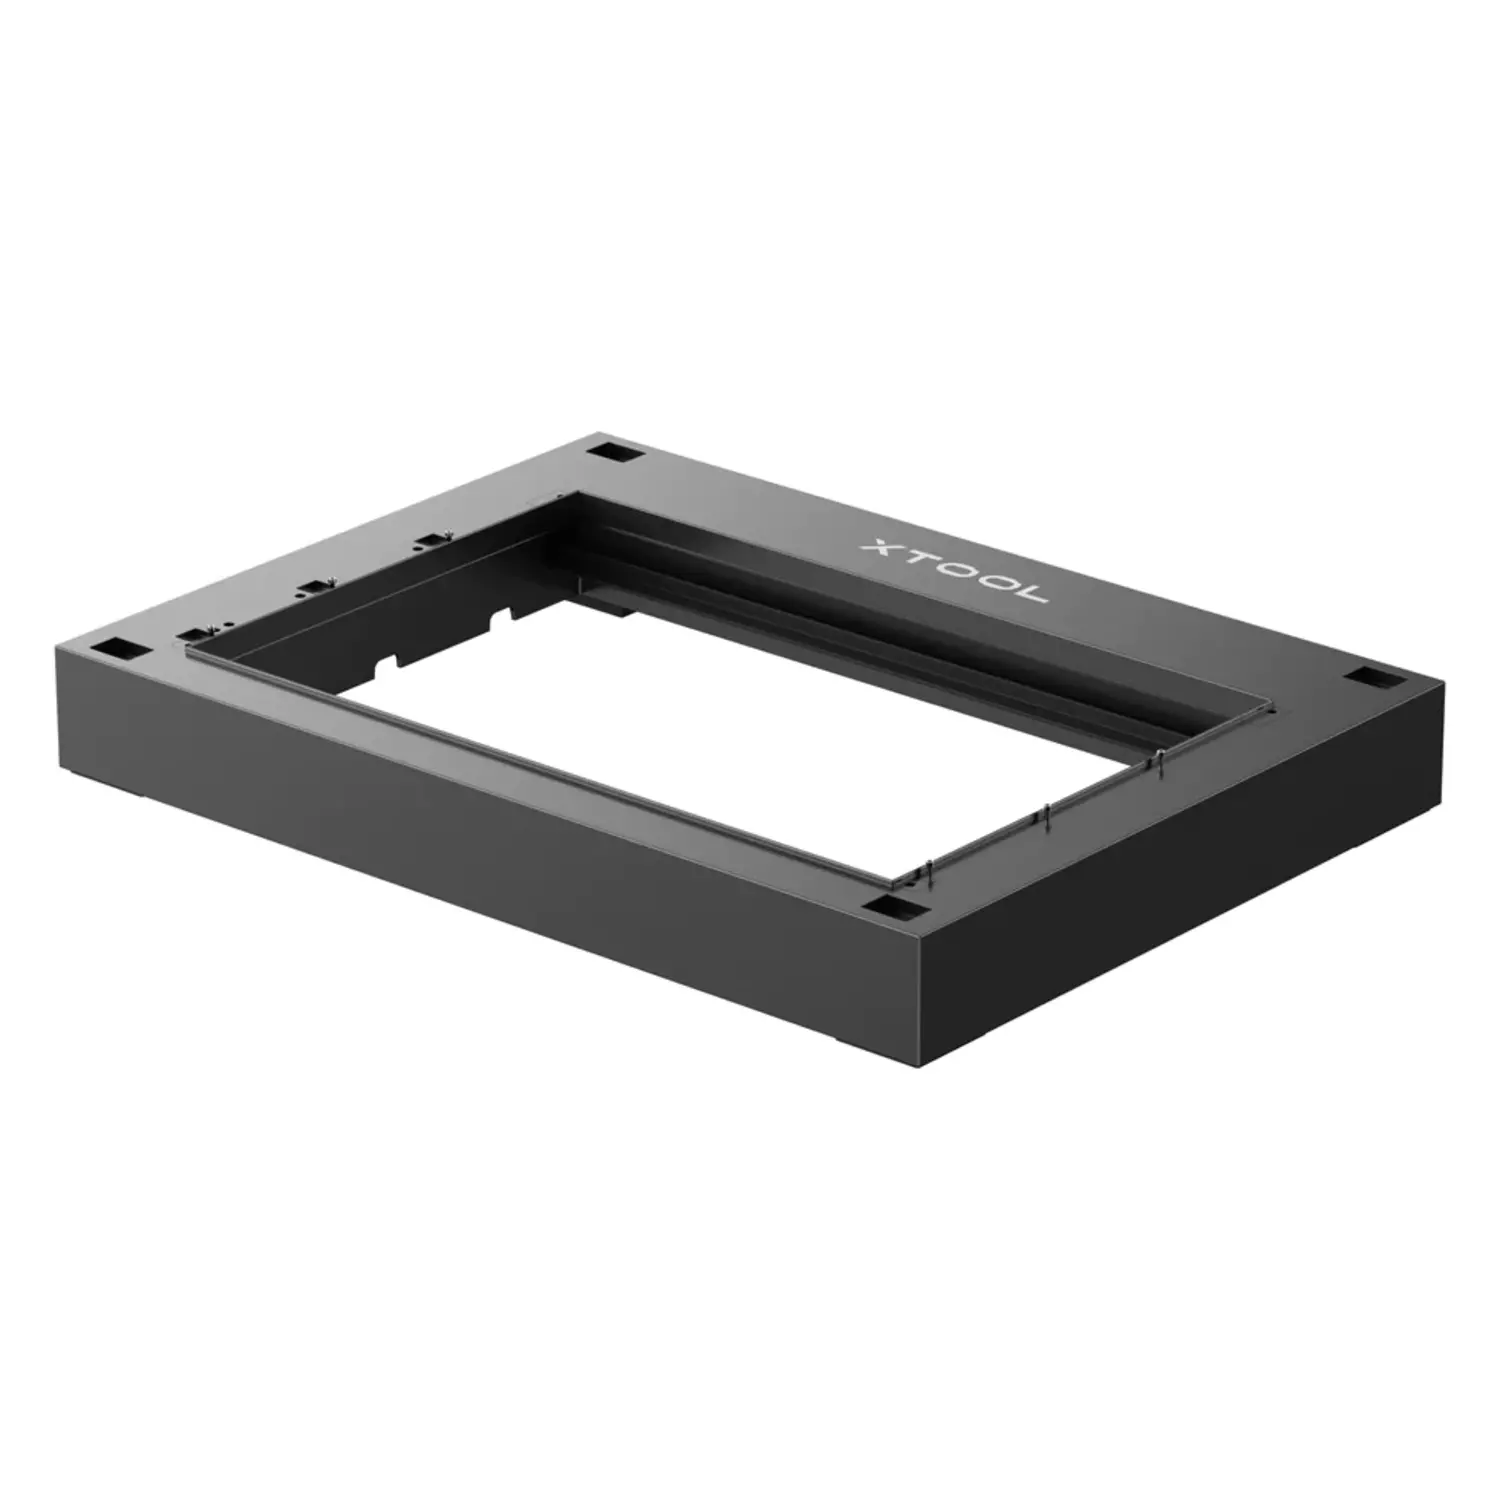 xTool S1 Riser Base - 5.3 Total Workspace Height